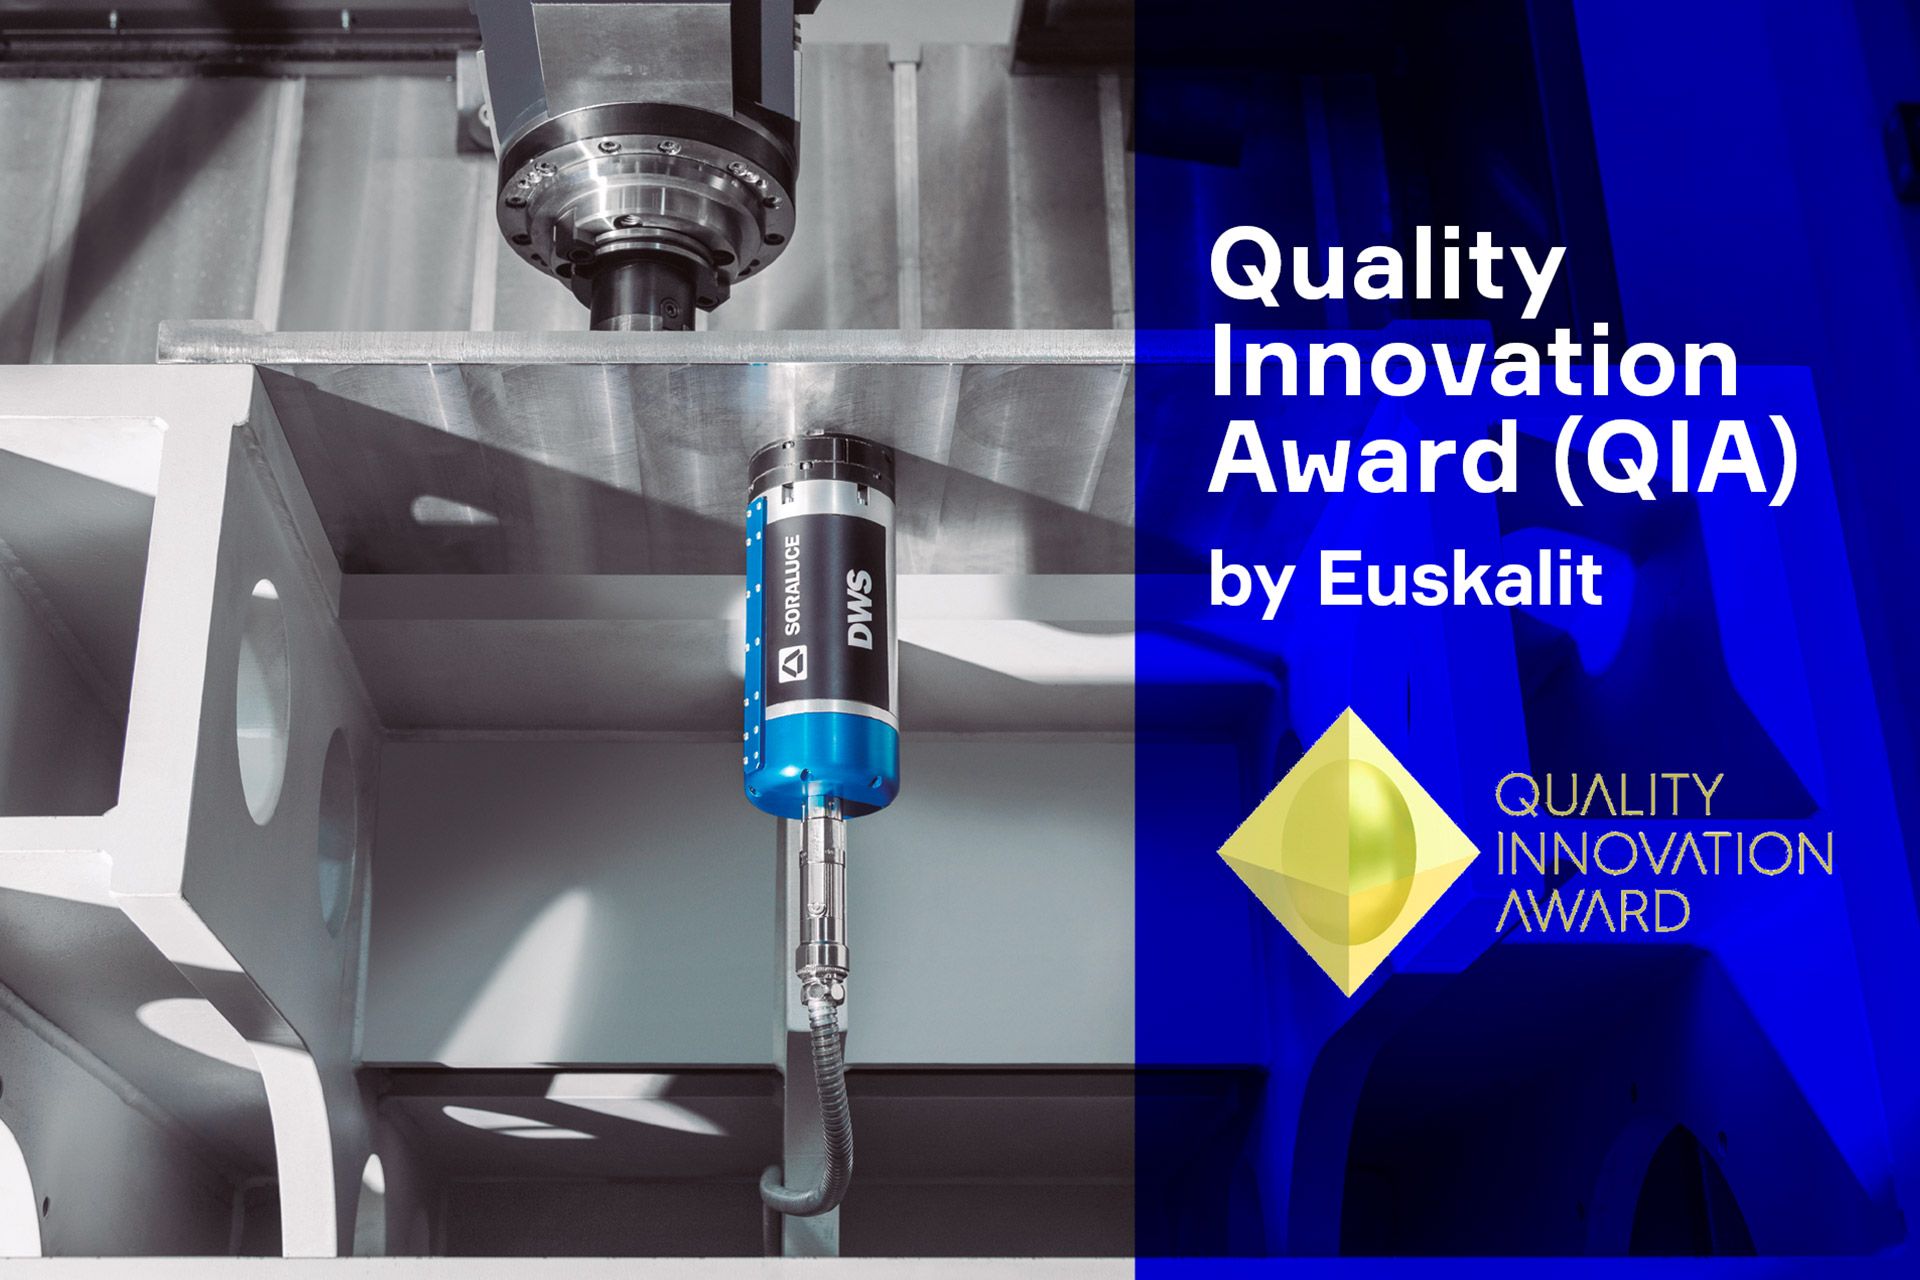 “European quality innovation of the year” saria